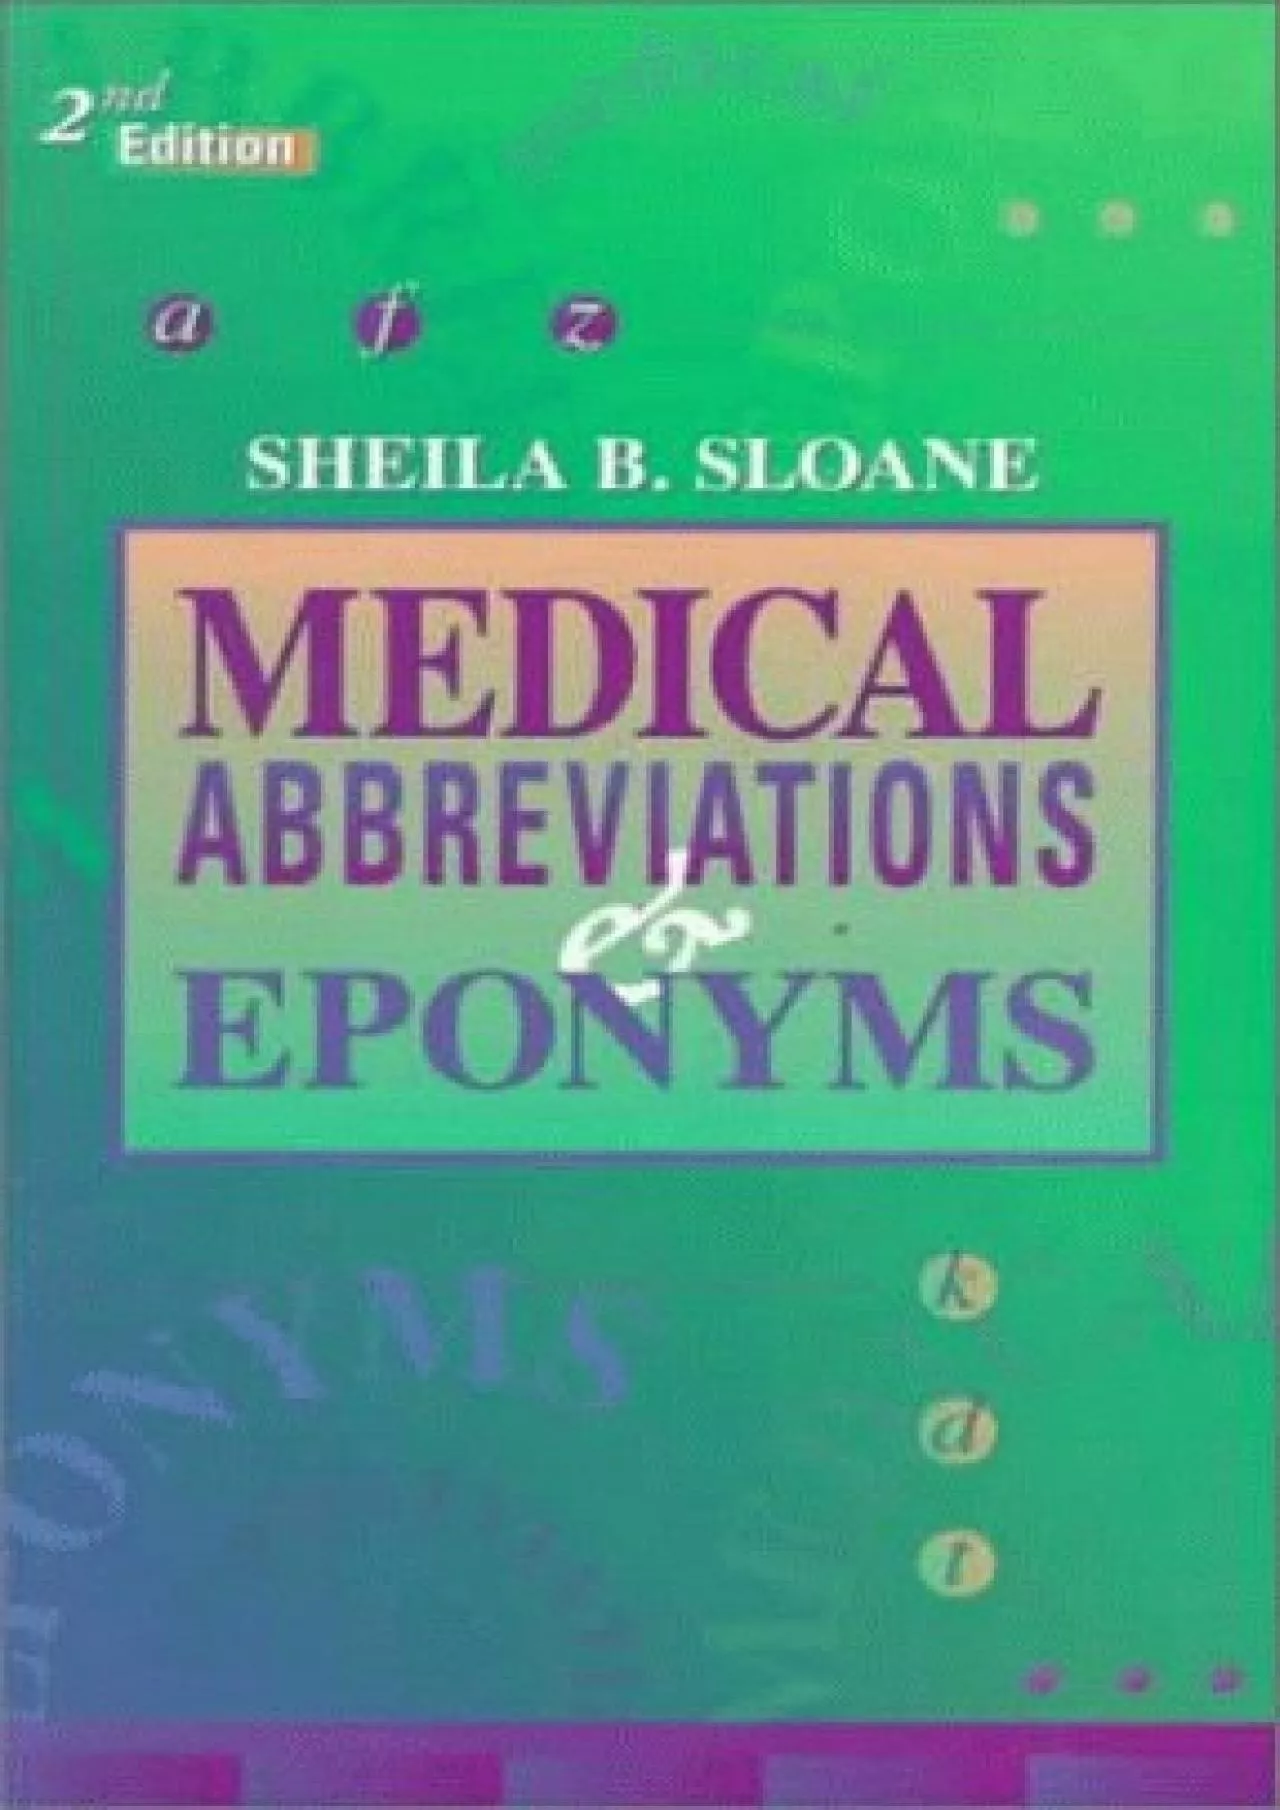 (BOOK)-Medical Abbreviations and Eponyms (MEDICAL ABBREVIATIONS & EPONYMS (SLOANE))